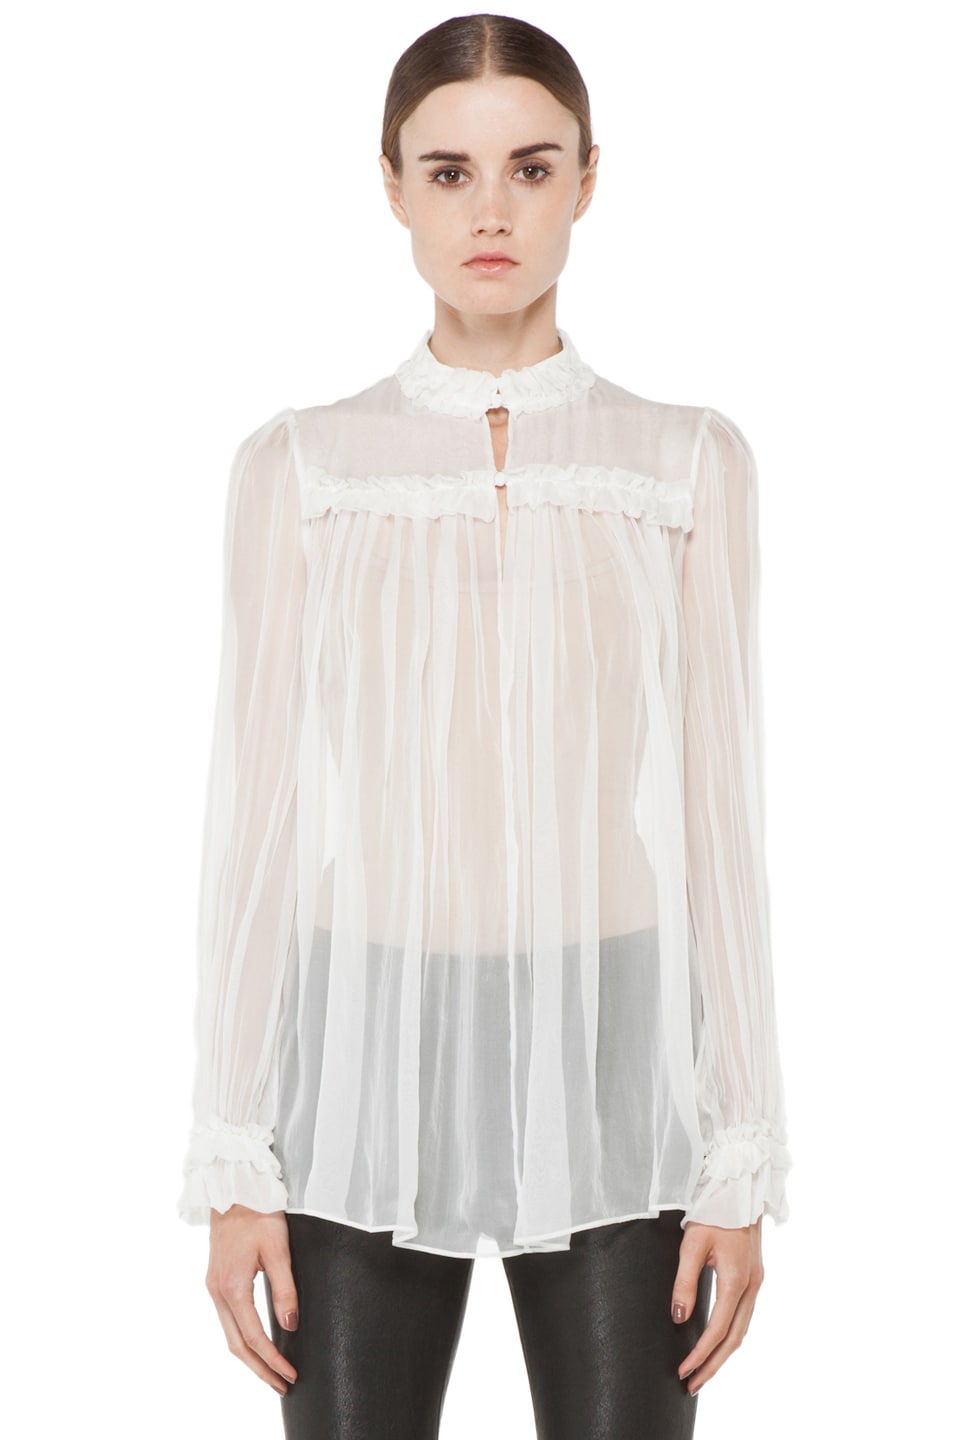 Alexander McQueen High Neck Pleated Blouse in Ivory | FWRD